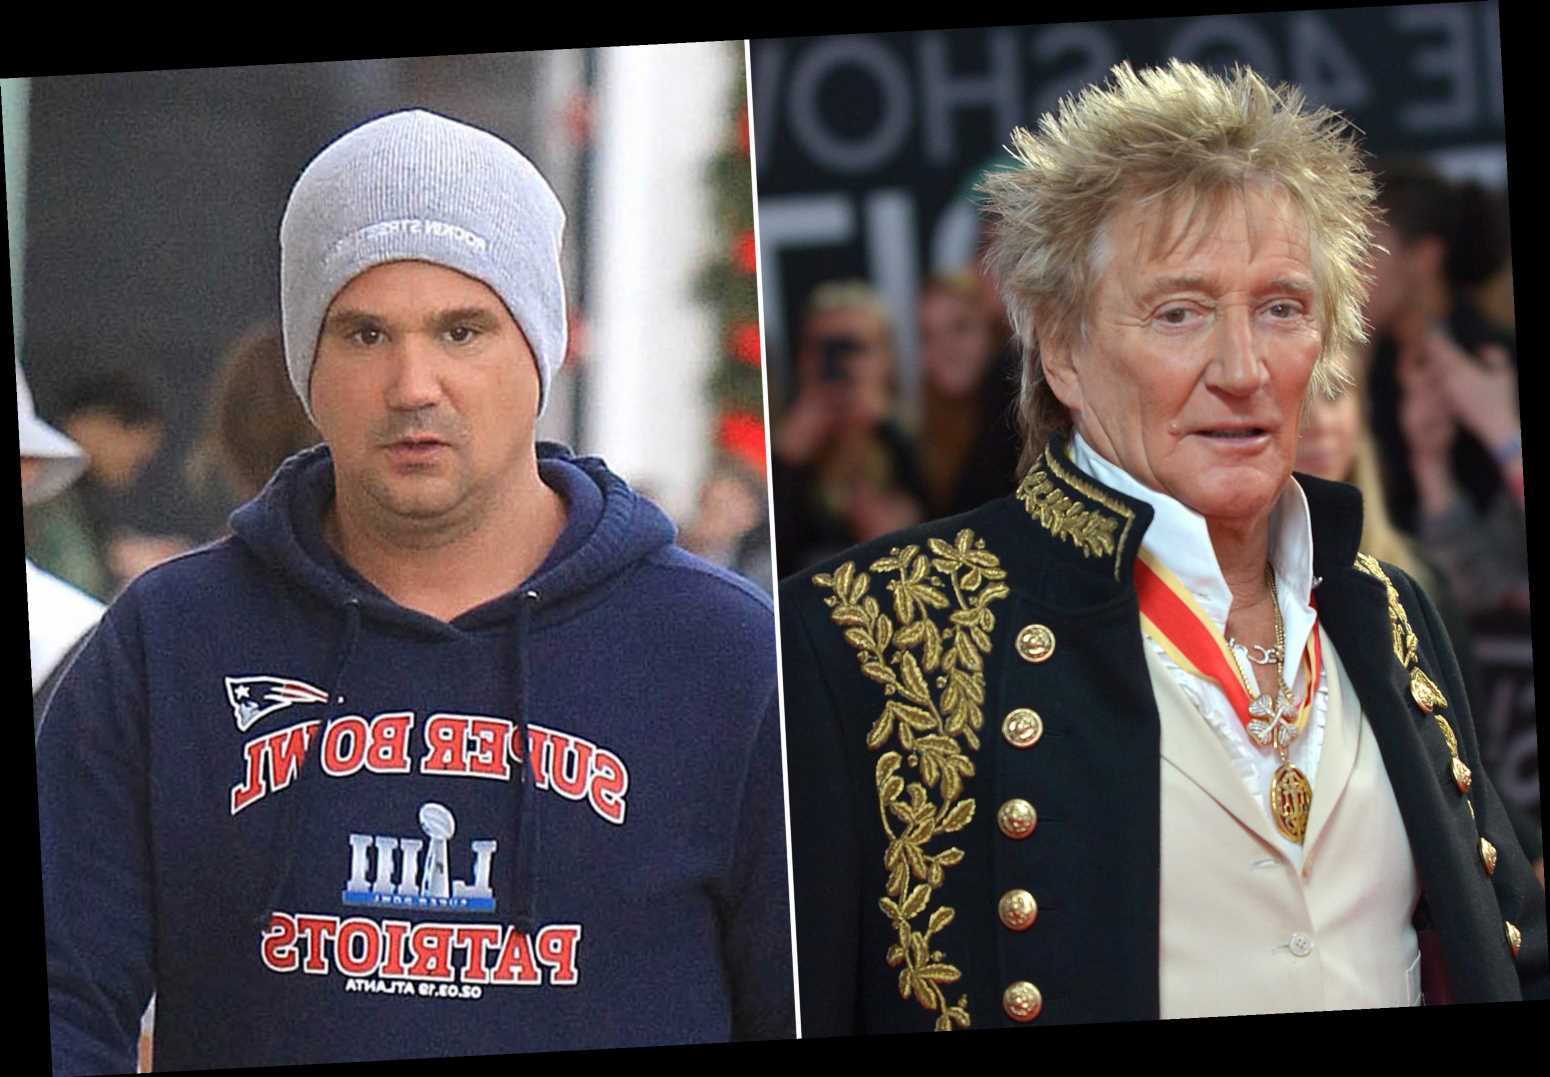 Rod Stewart and son reach plea deal over New Year’s Eve scuffle Big